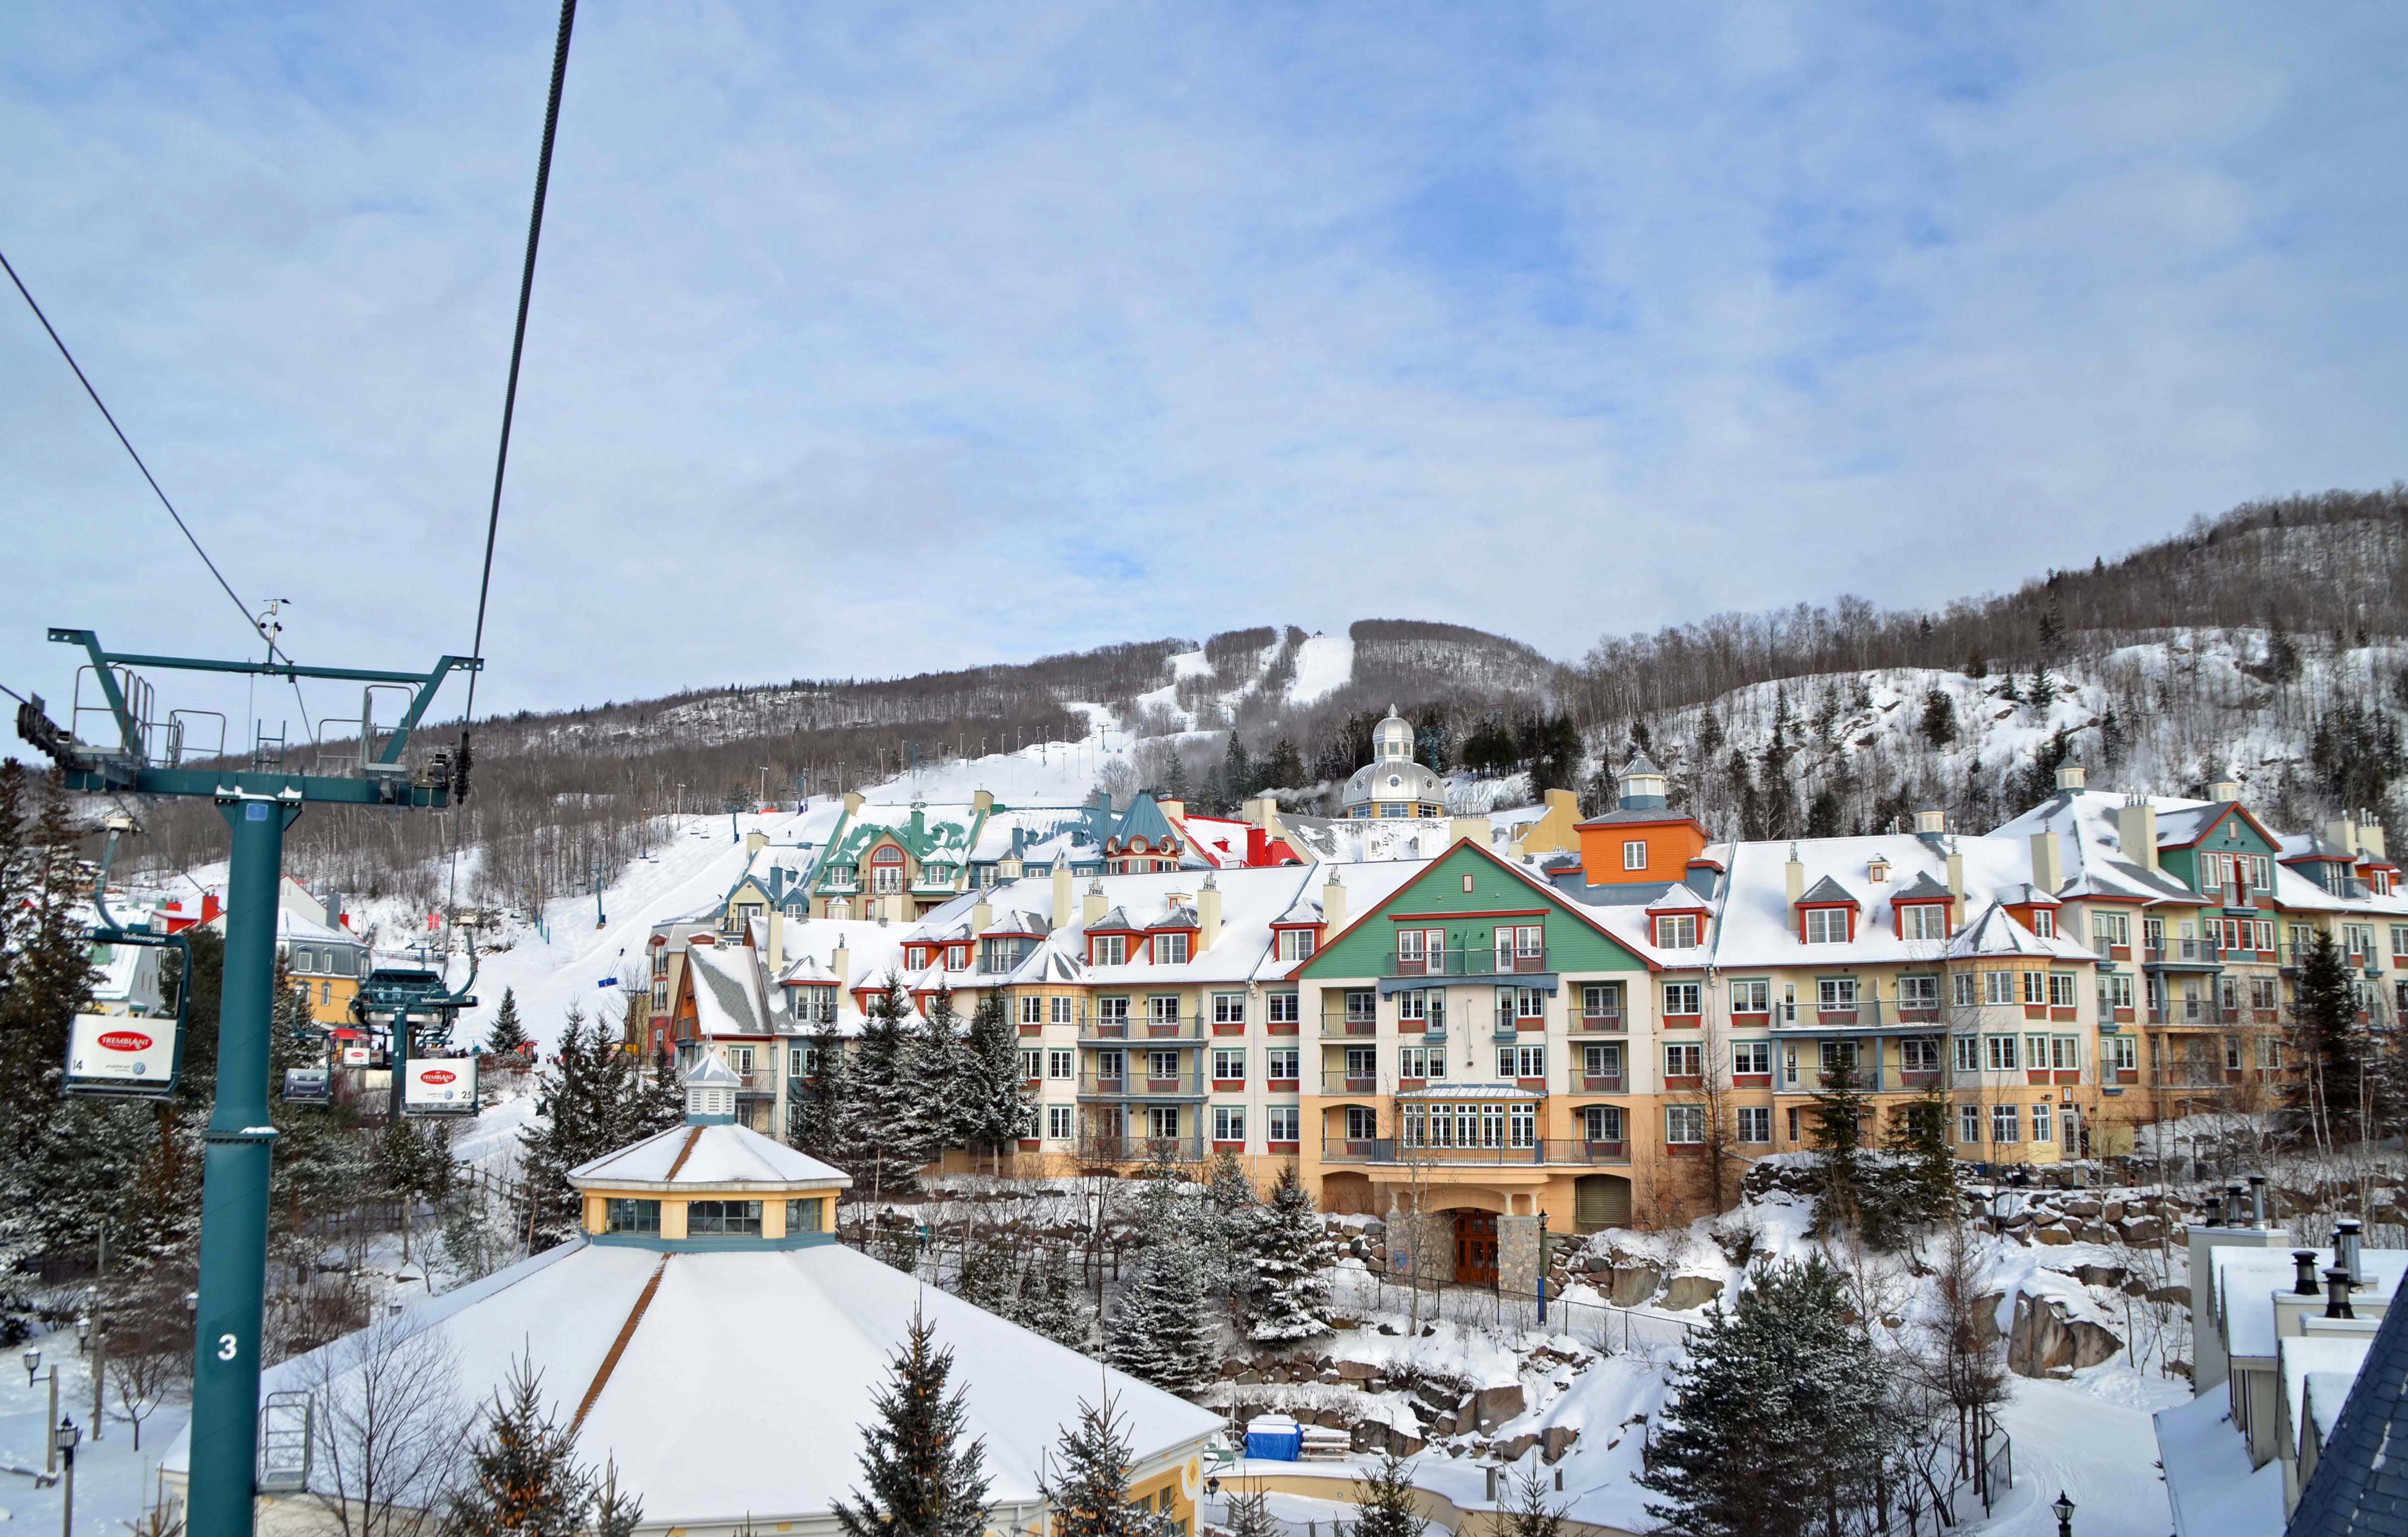 Mont Tremblant Village from the People Mover